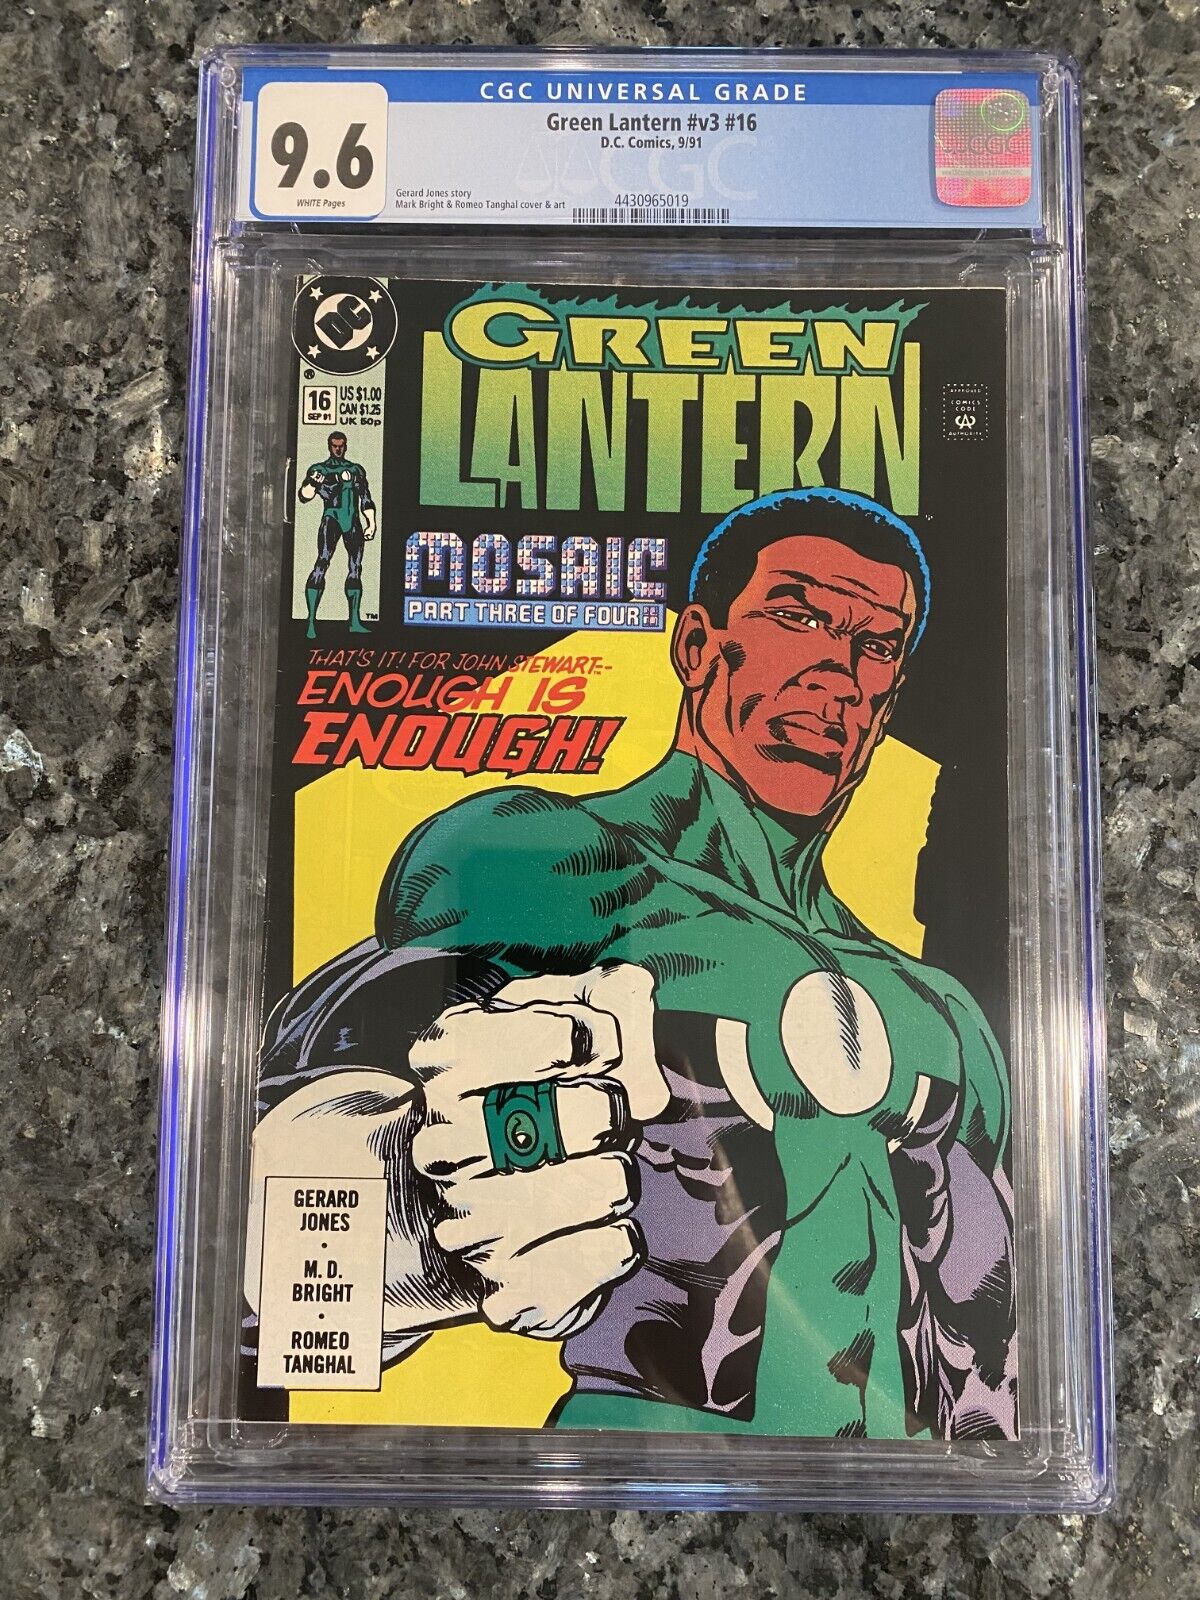 Green Lantern's Battle Cry: Issue #16 - CGC 9.6 White Pages - Enough is enough